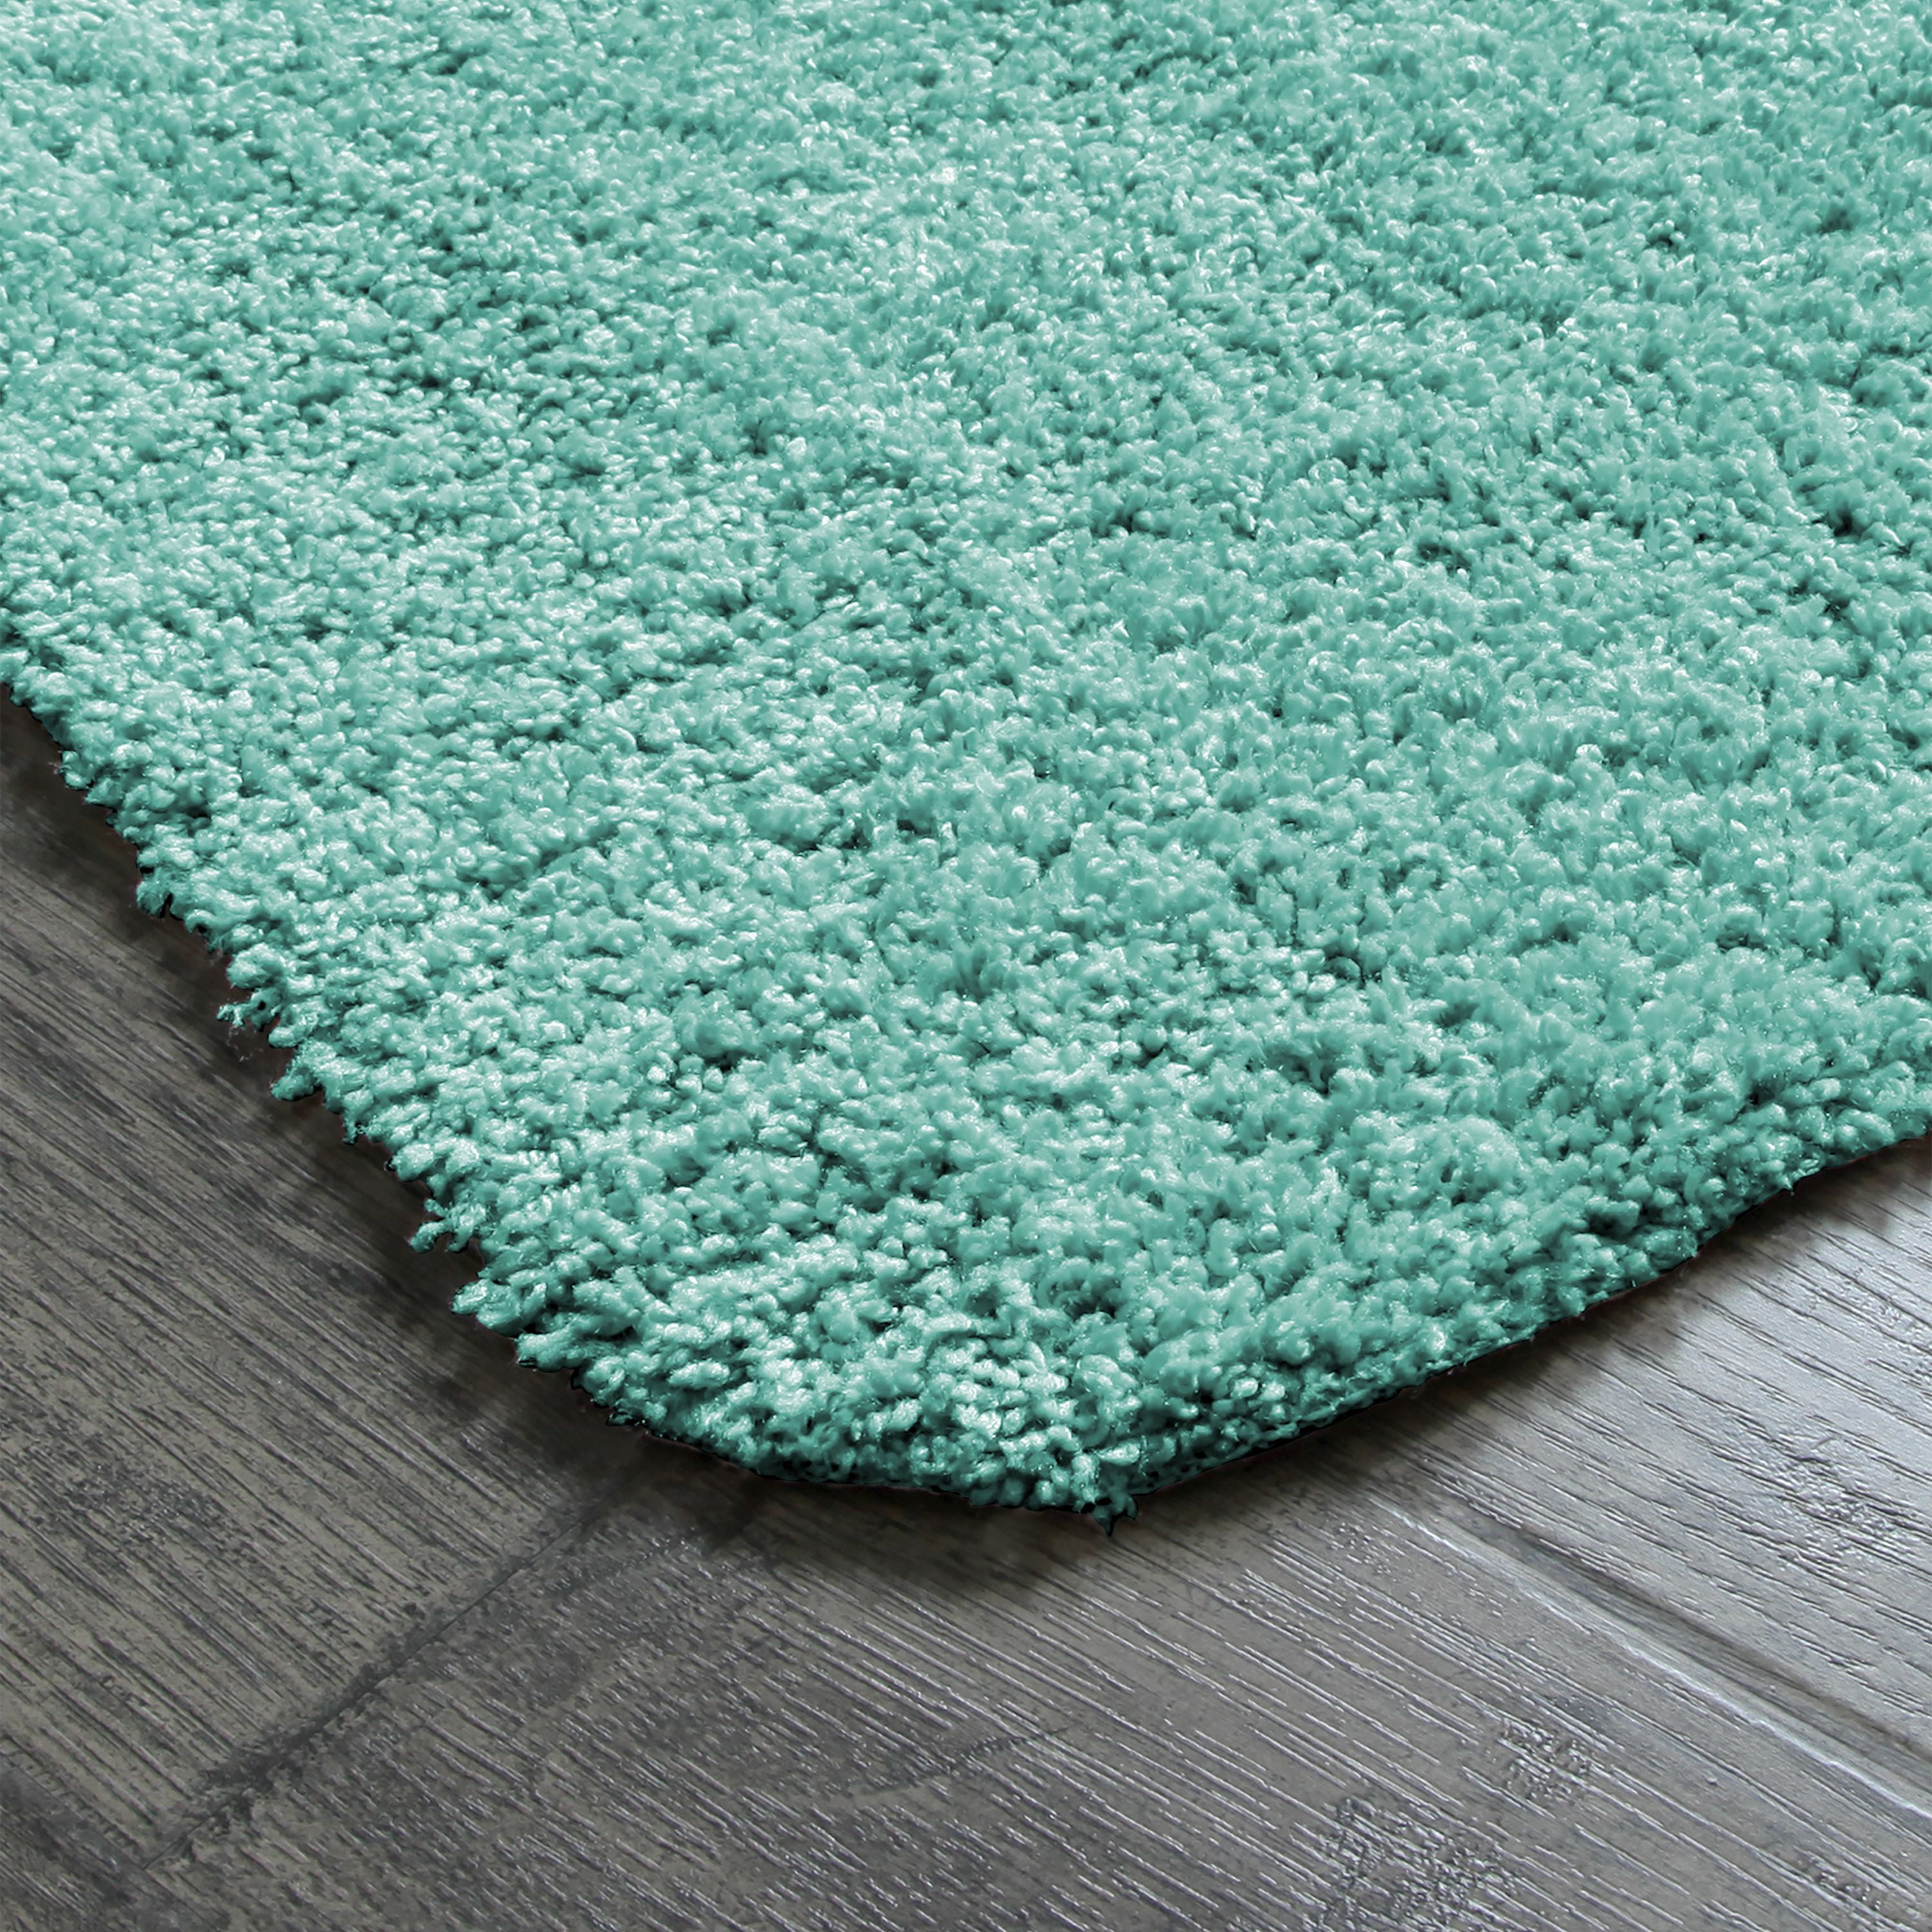 Mainstays 2pk. Chenille Bath Solid Bath Rug, Clearly Aqua and Turquoise,  17x23.5 